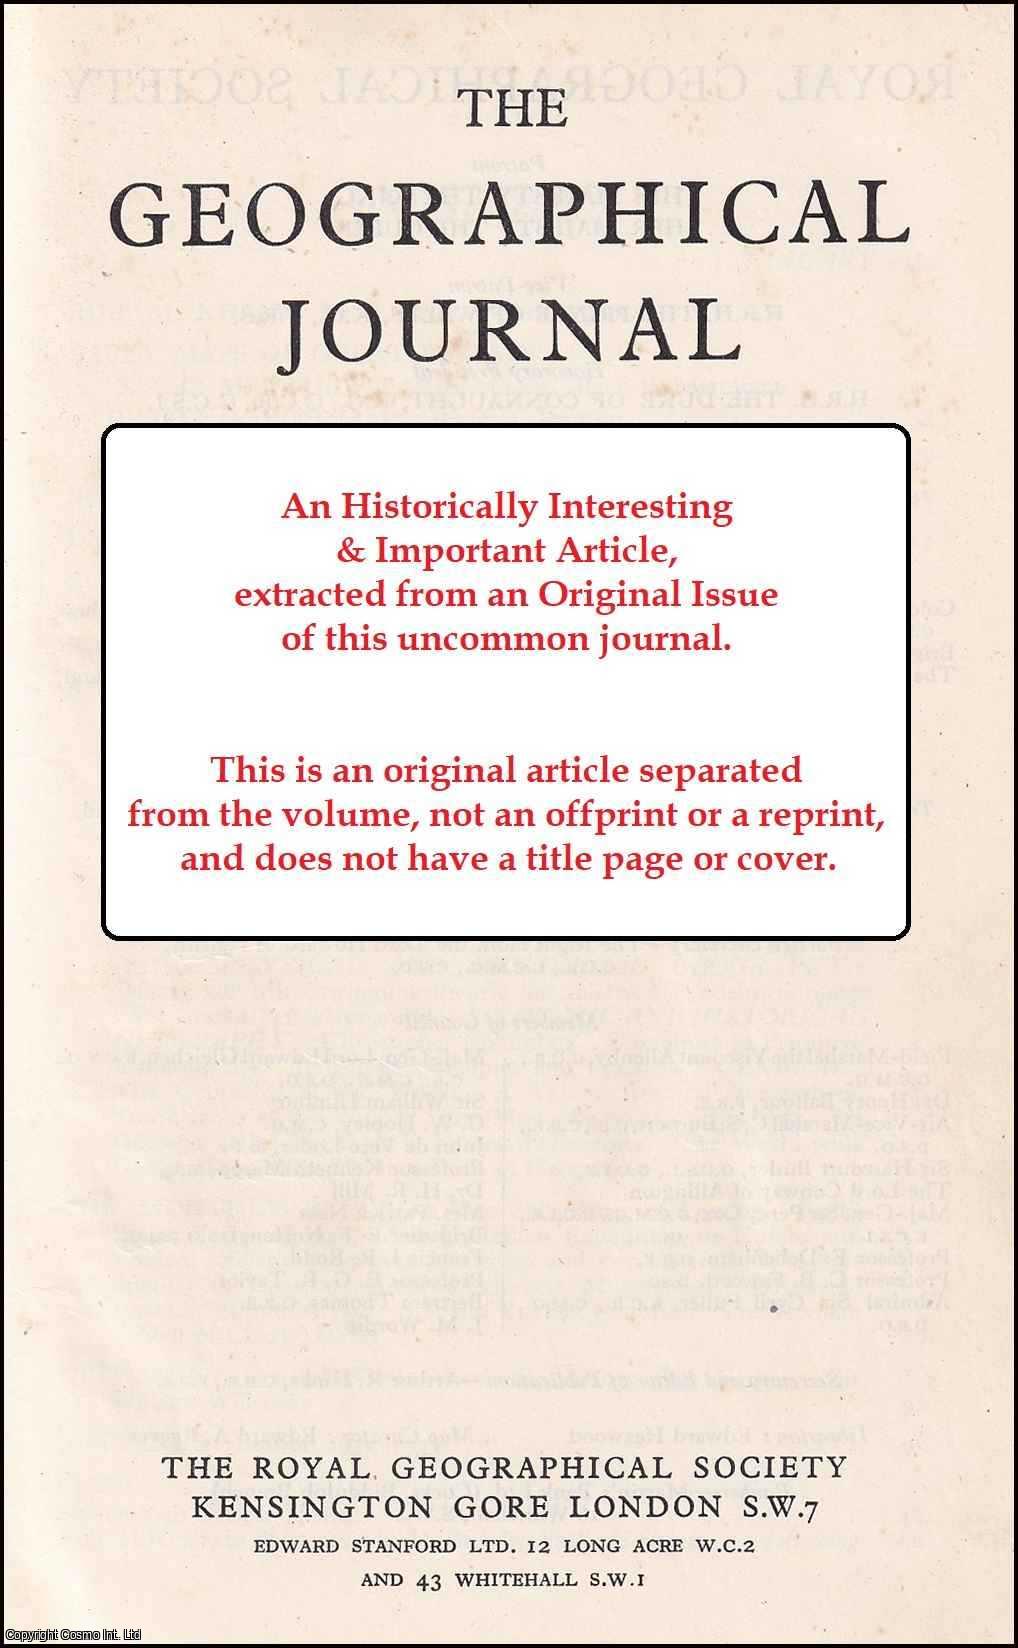 James H. Johnson - The Commercial Use of Peat in Northern Ireland. An original article from the Geographical Journal, 1959.